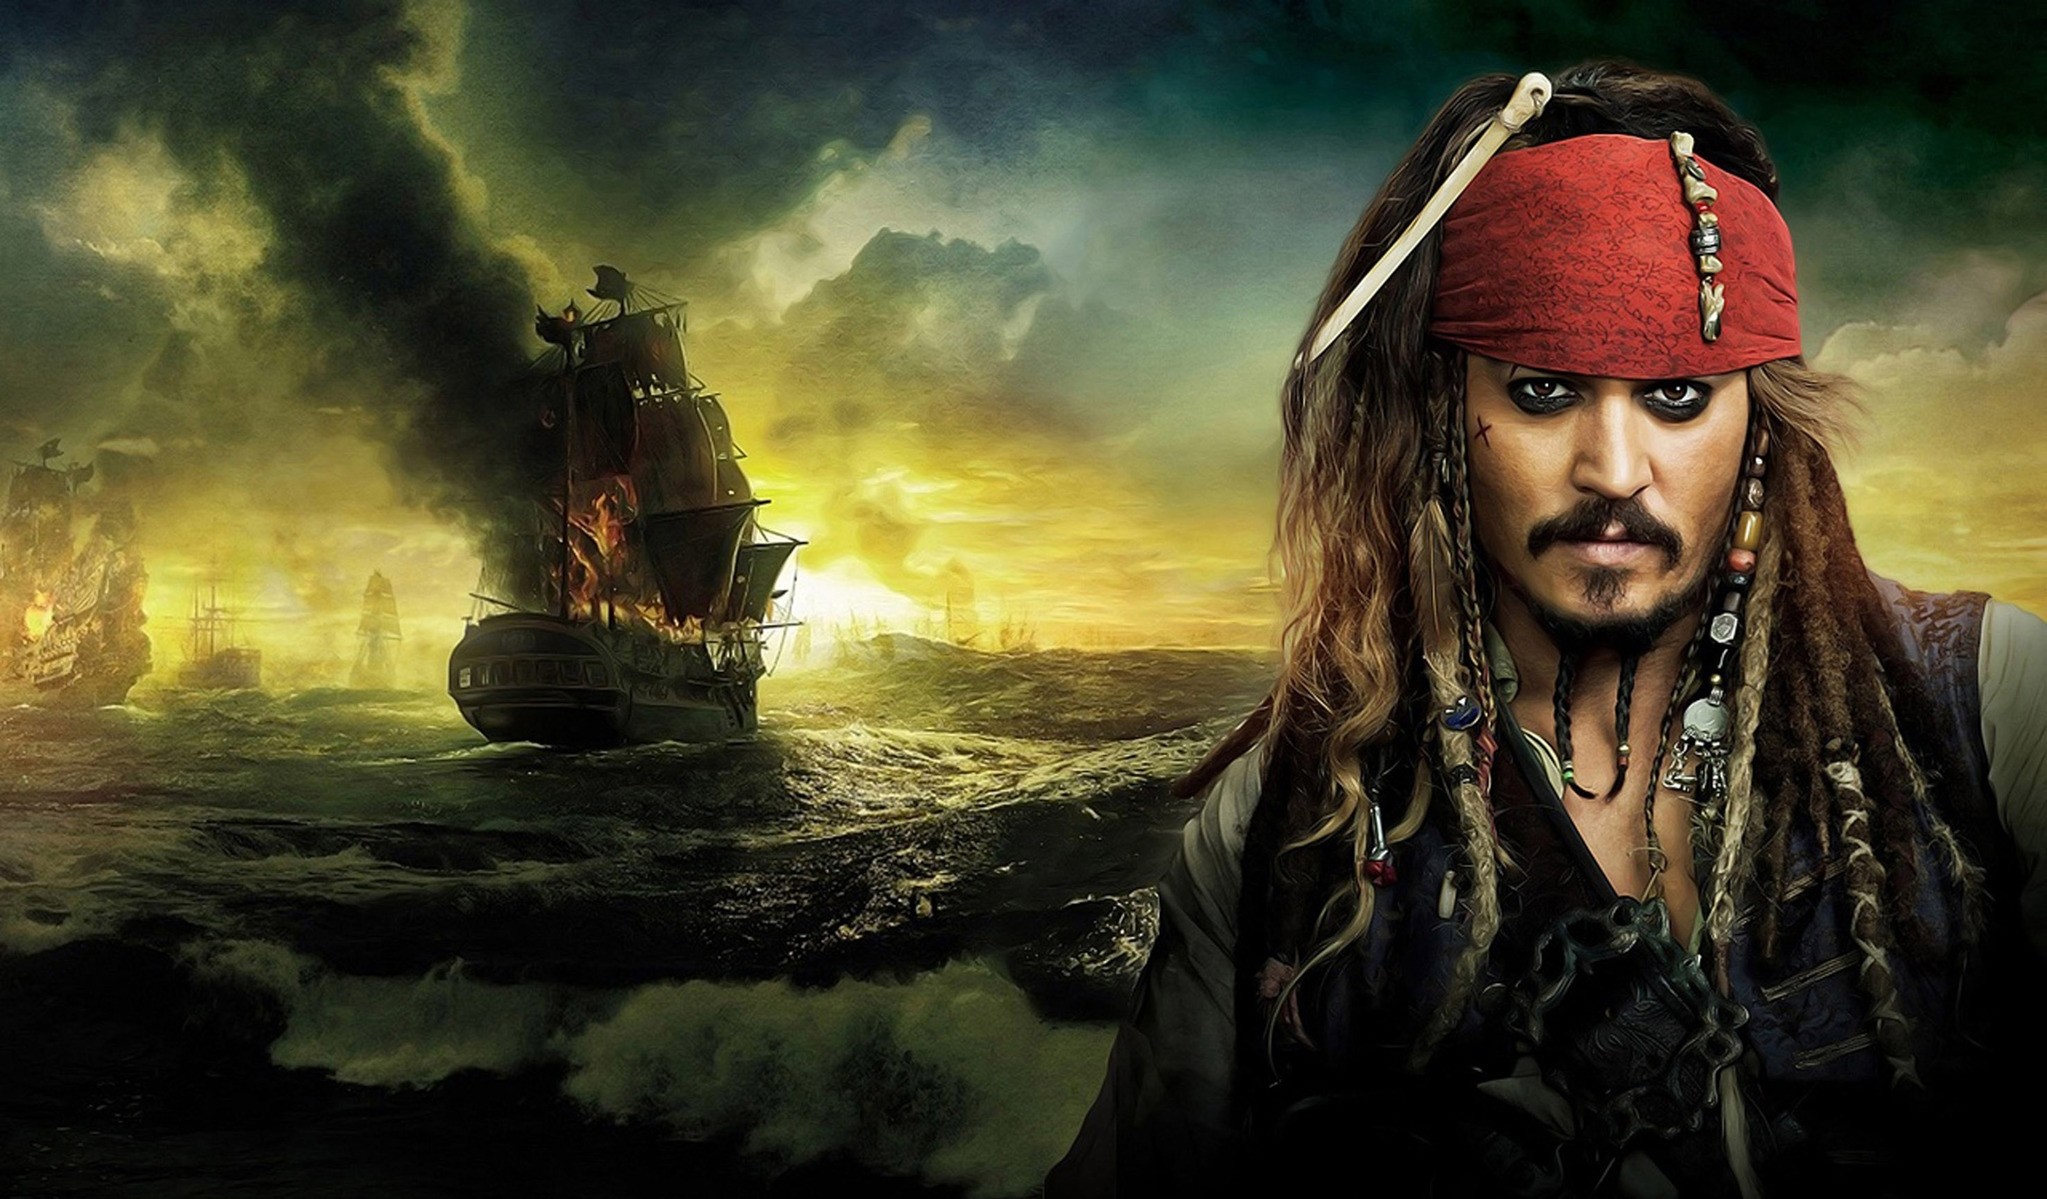 Behind comical action of Hollywood hit u201cPirates of Caribbeanu201d lies an interesting historical truth. While historical character of Captain Jack Sparrow was an Englishman, historical facts indicate he led an adventurous life & had converted to Islam.